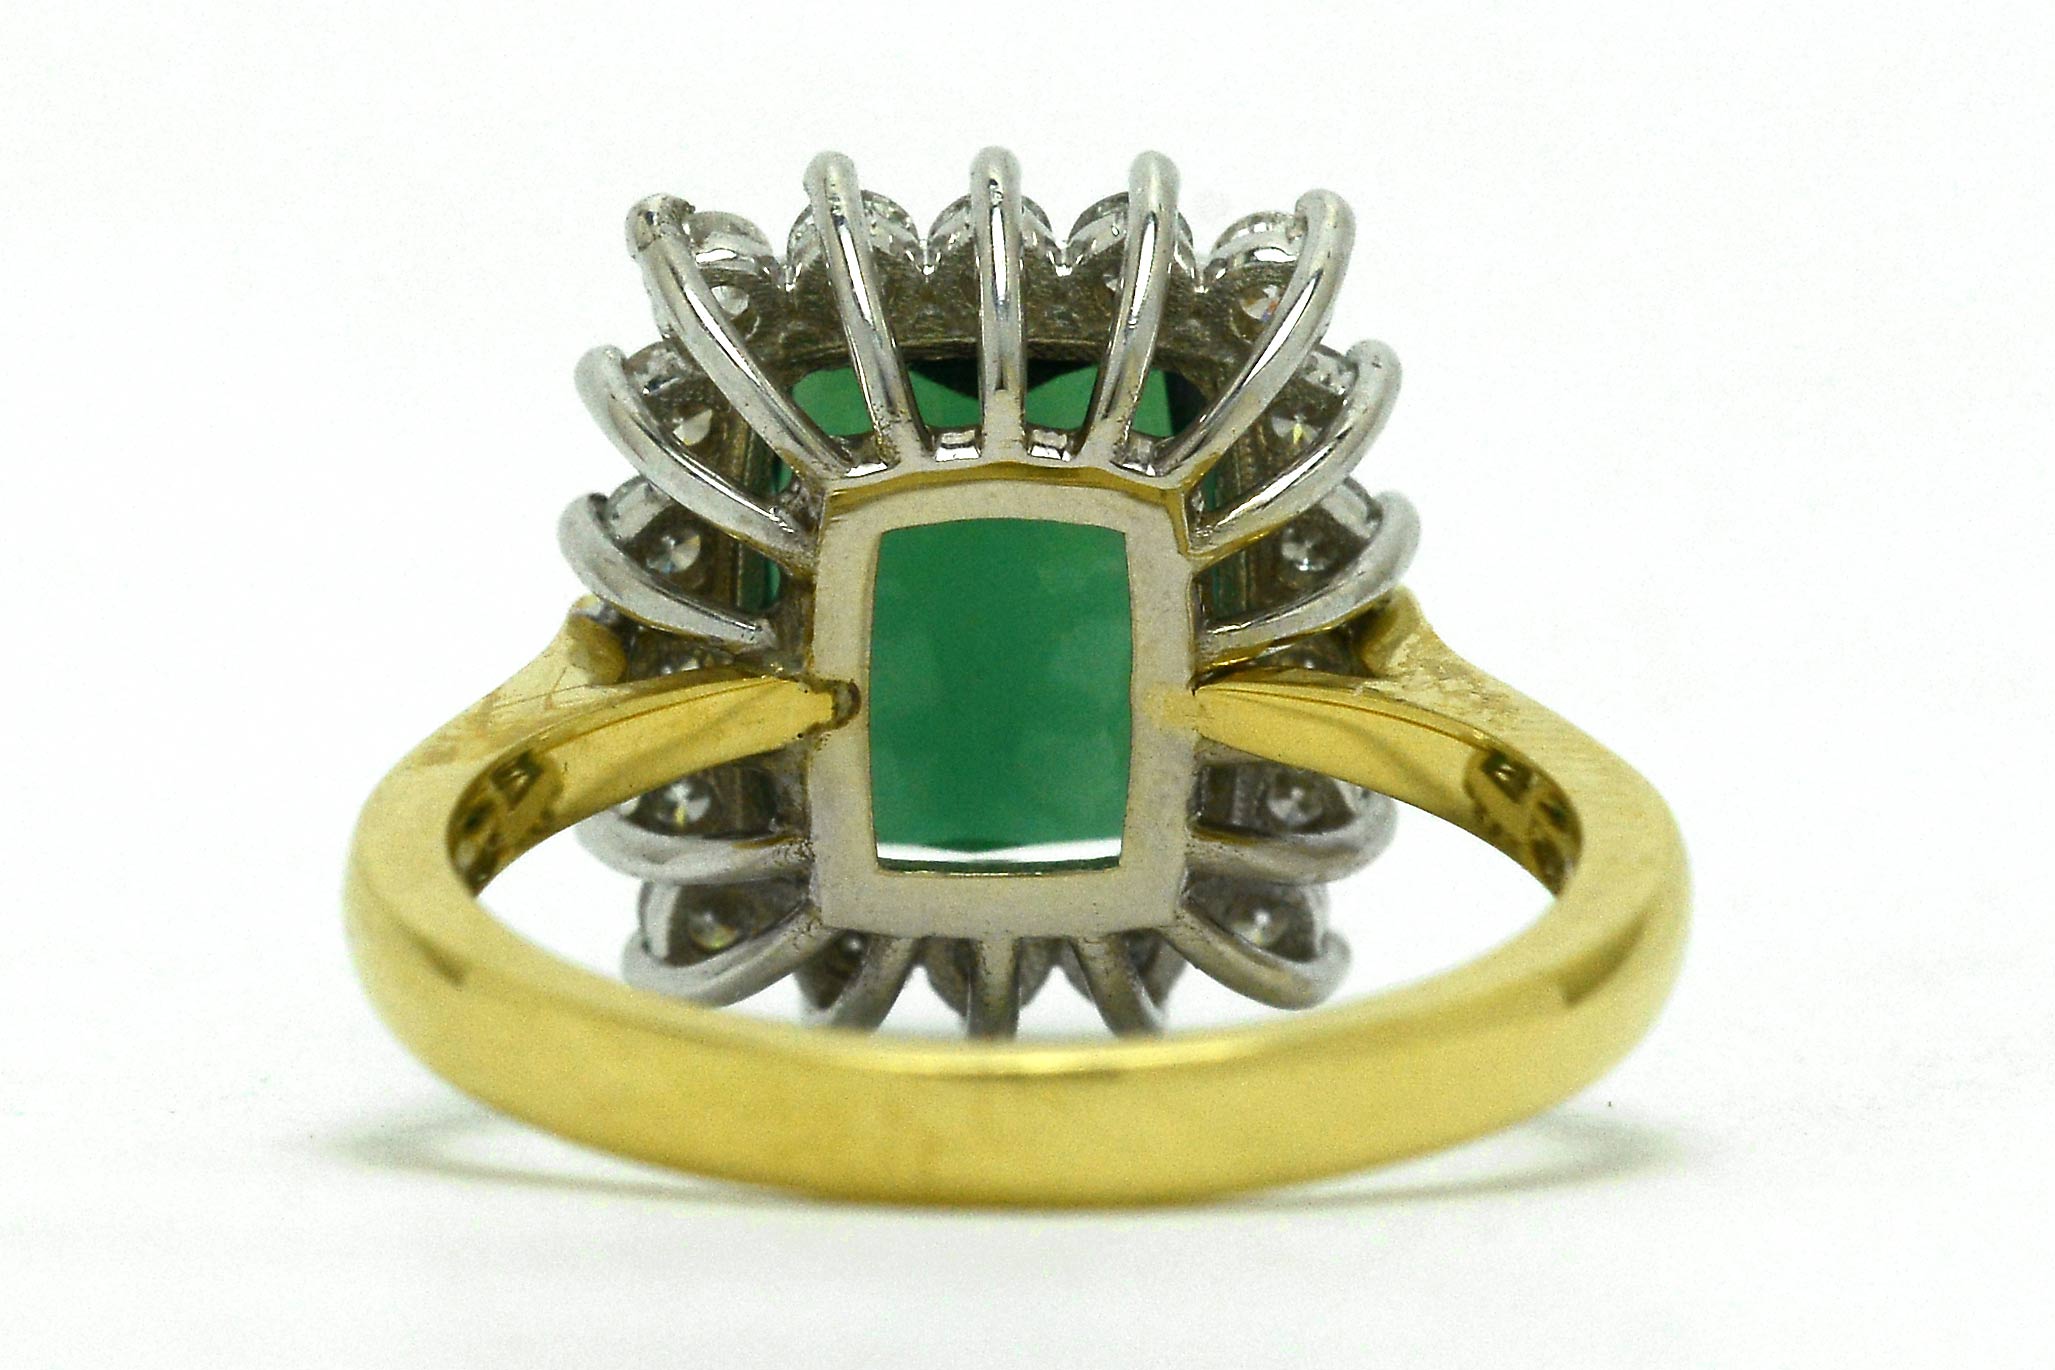 A large, 3 carat green tourmaline in a white gold basket ring setting.